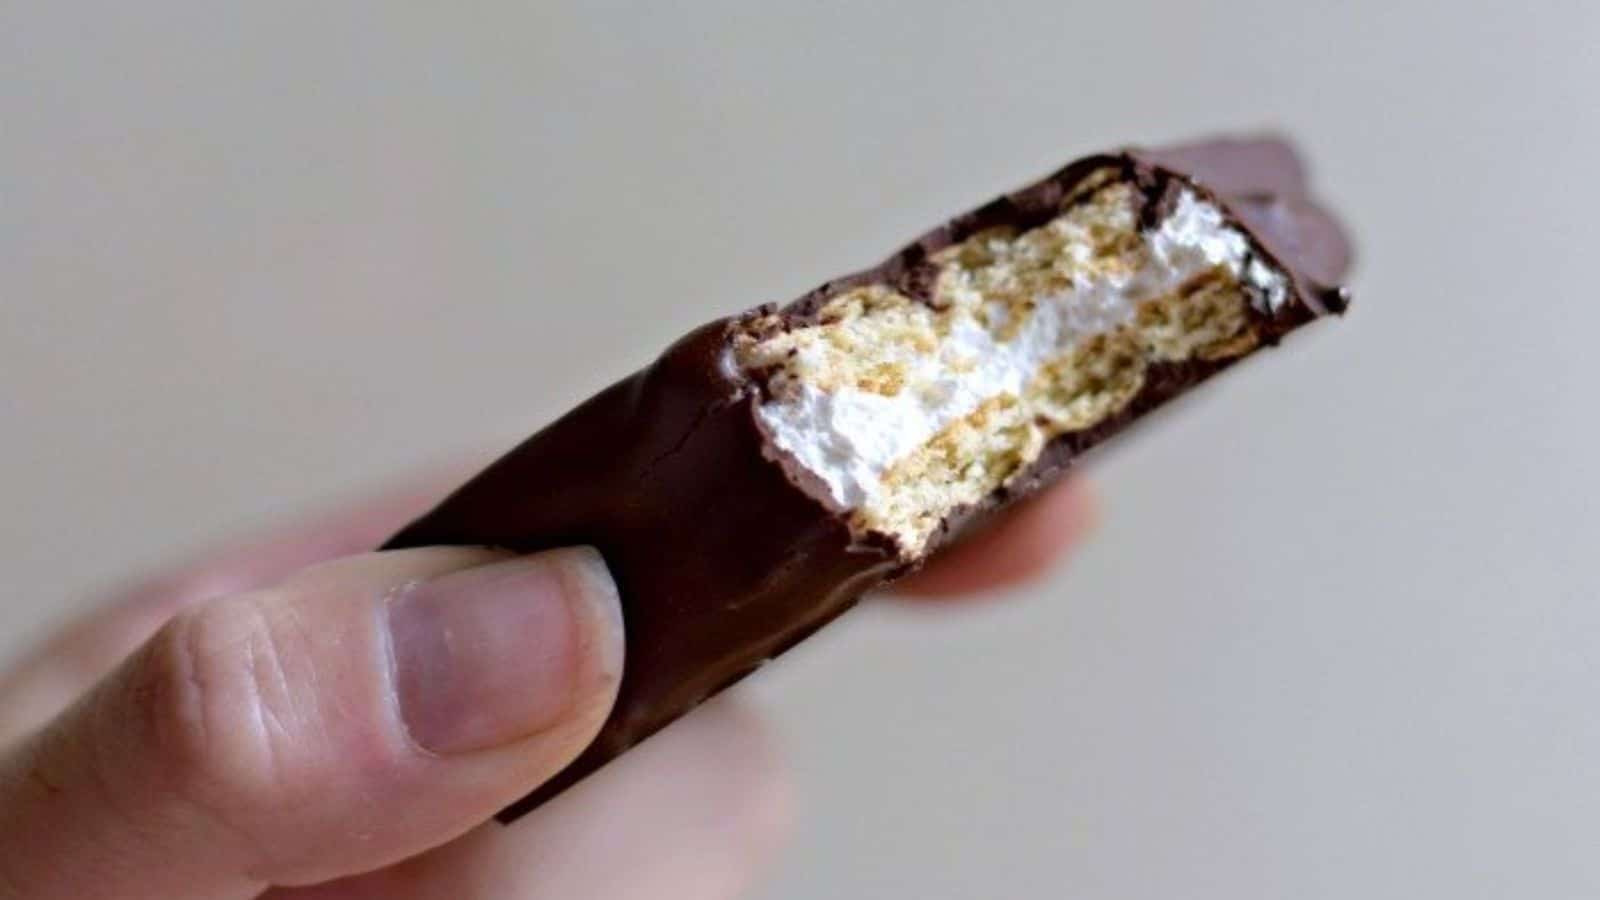 Image shows a hand holding a copycat Girl Scout s'mores cookie with a bite taken from it.